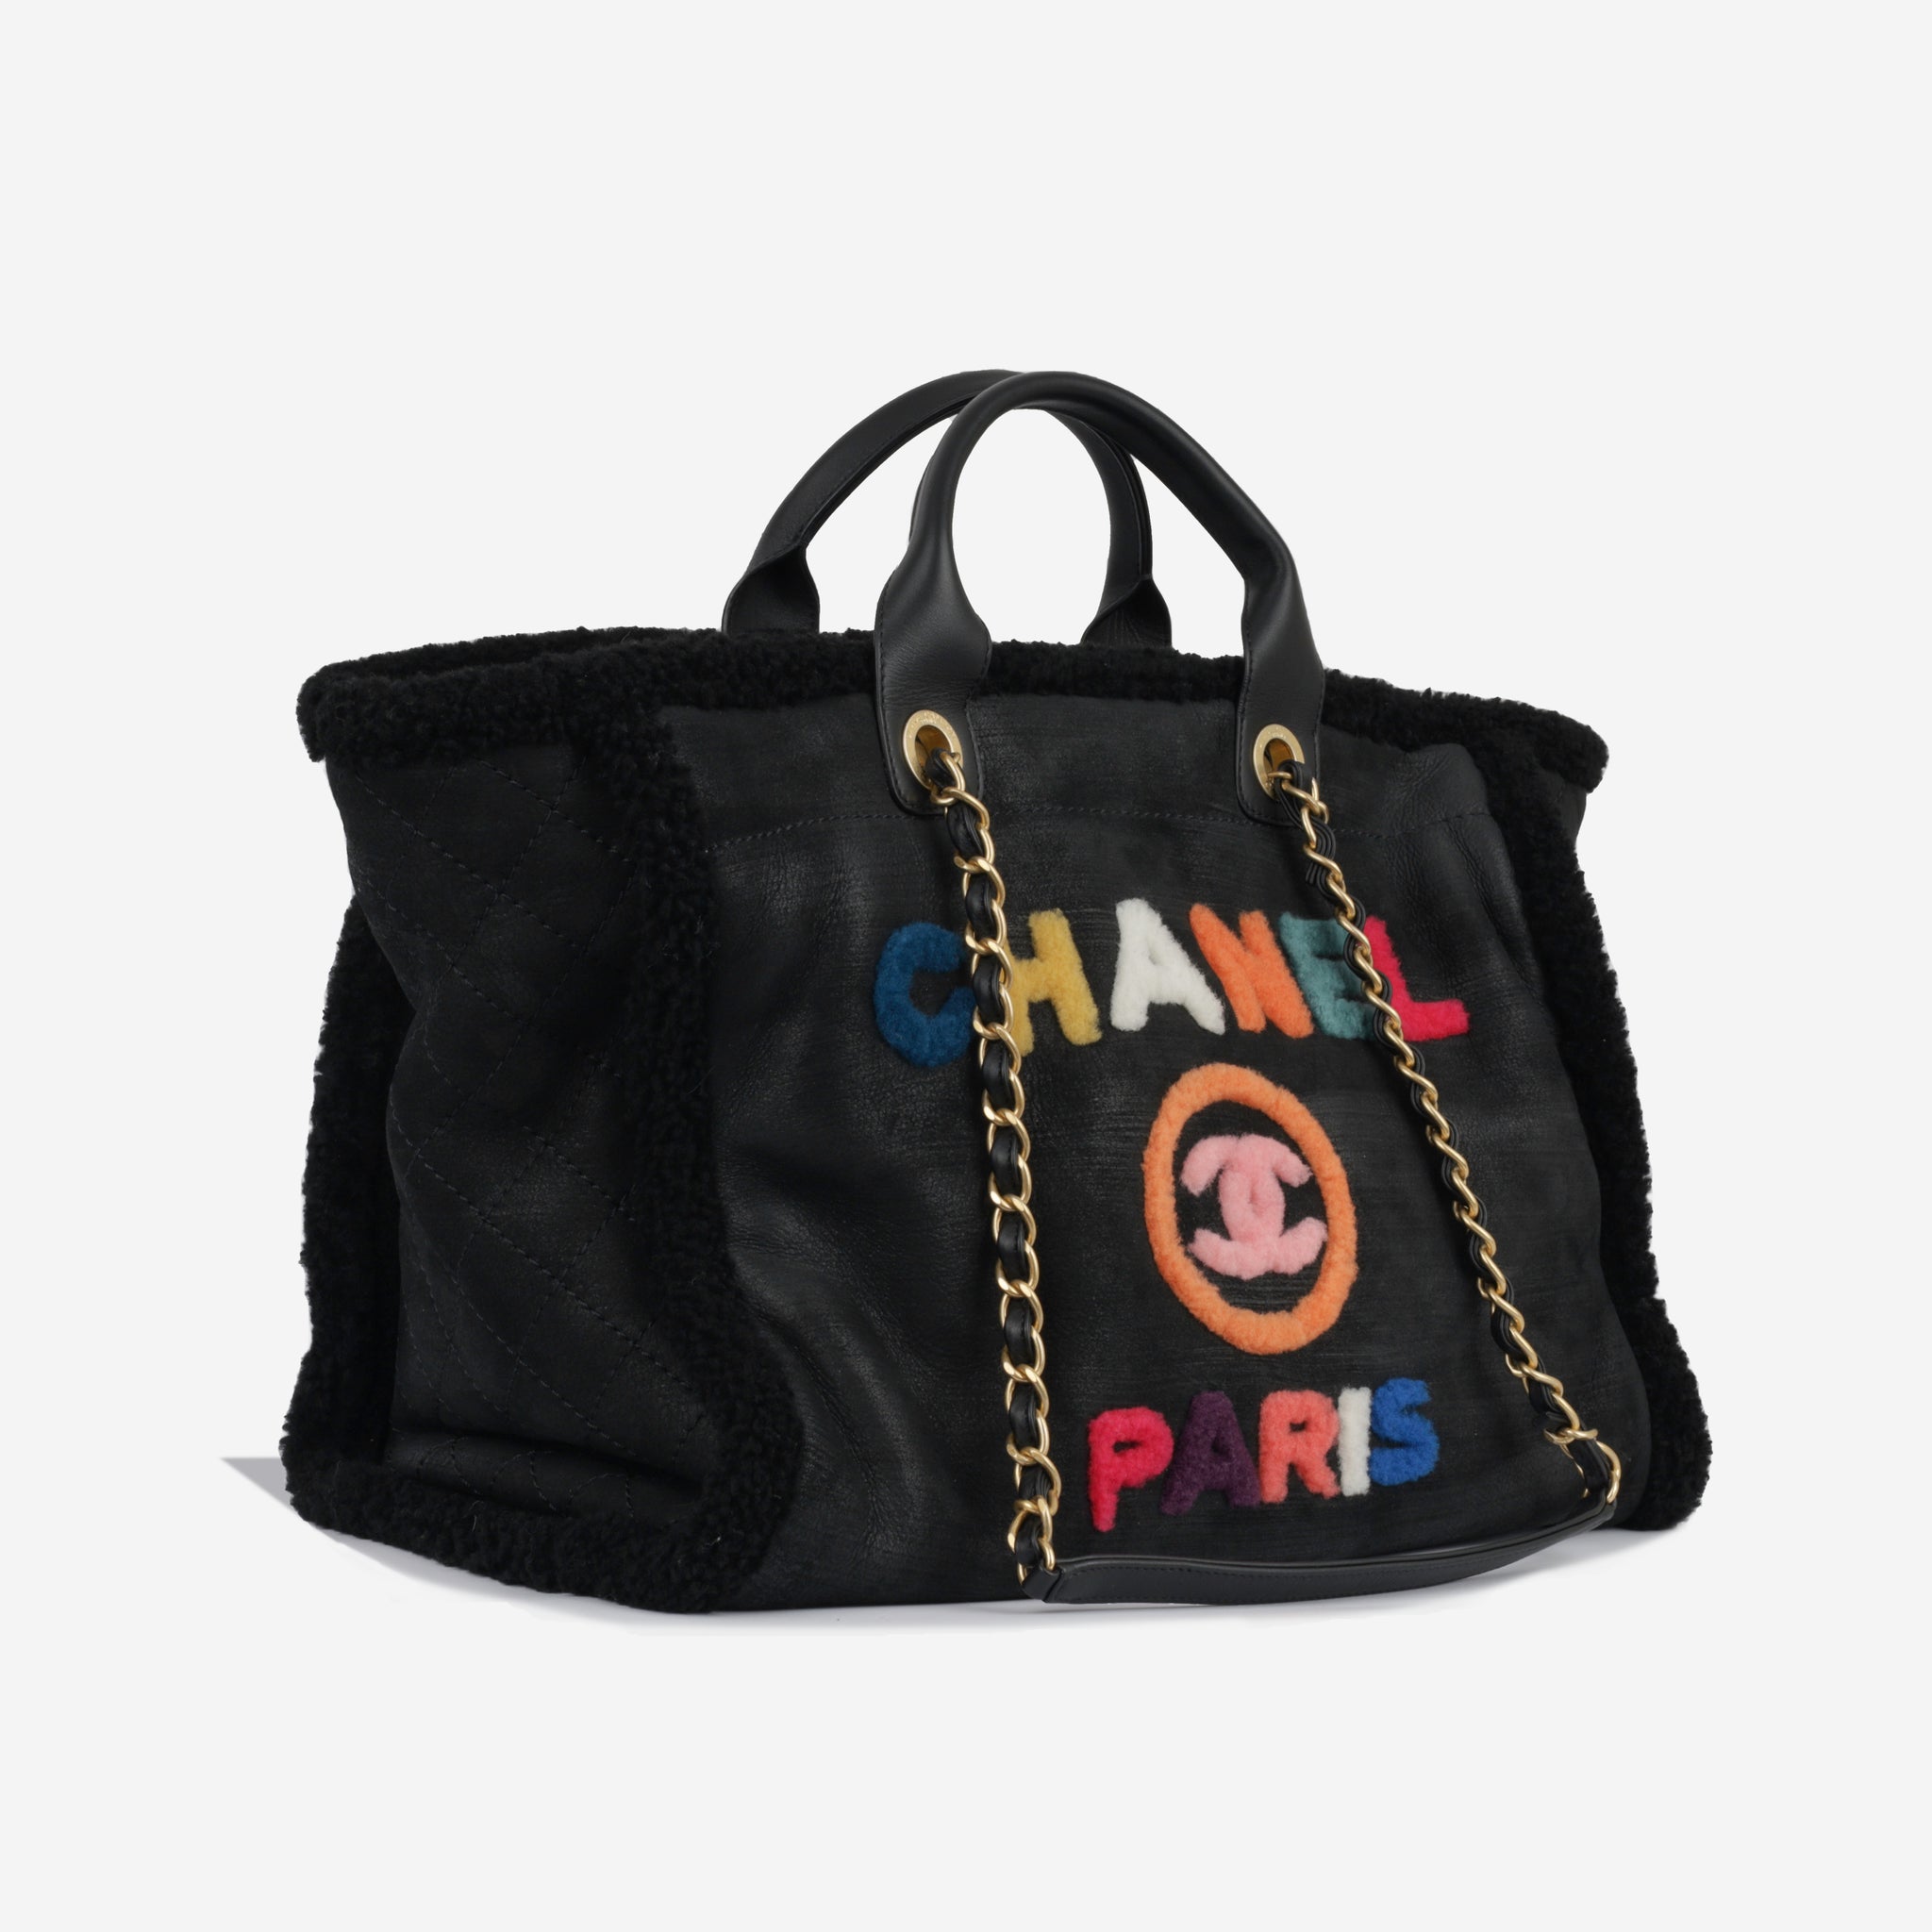 Chanel - Deauville - Large Tote - Black Shearling - Multi - GHW - 2021